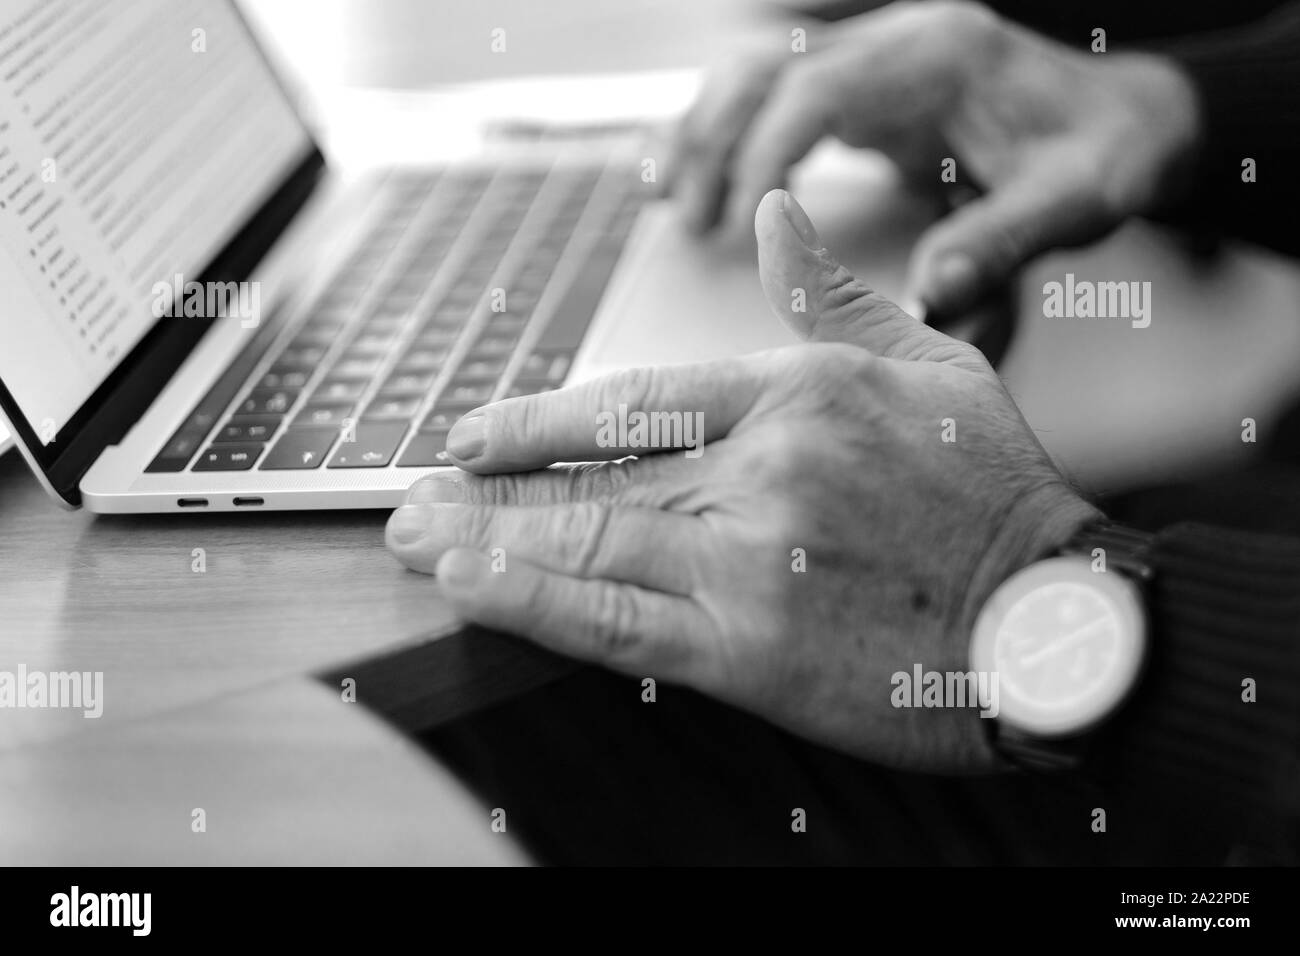 Man's hand brush on the notebook cursor control button while working with information Stock Photo